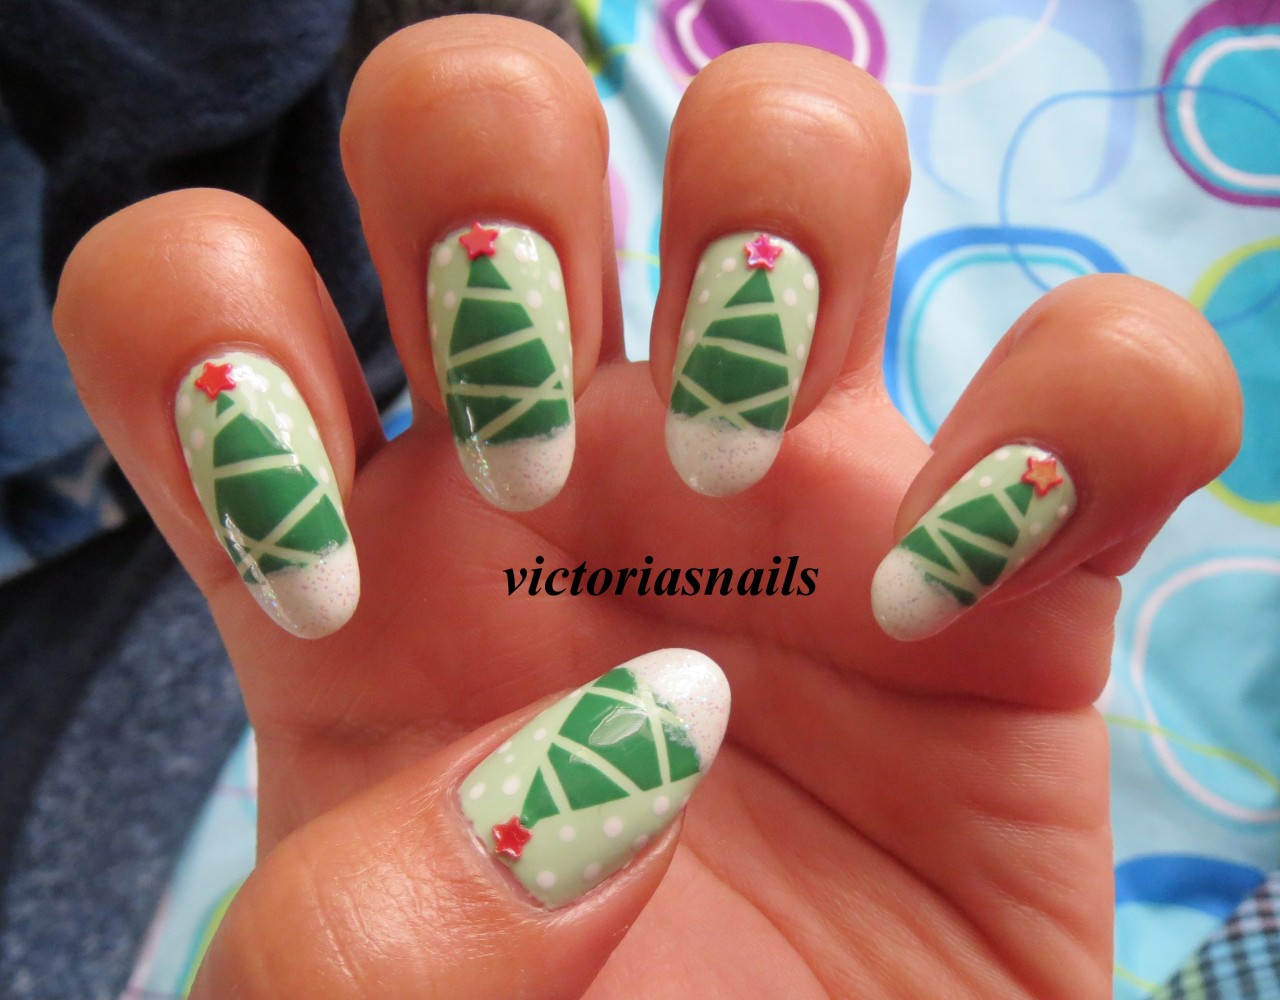 Merry Christmas!
Colors used:
Essie - Pretty Edgy
Sally Hansen - Mint Sorbet
Wet N&#8217; Wild - French White, Hallucinate